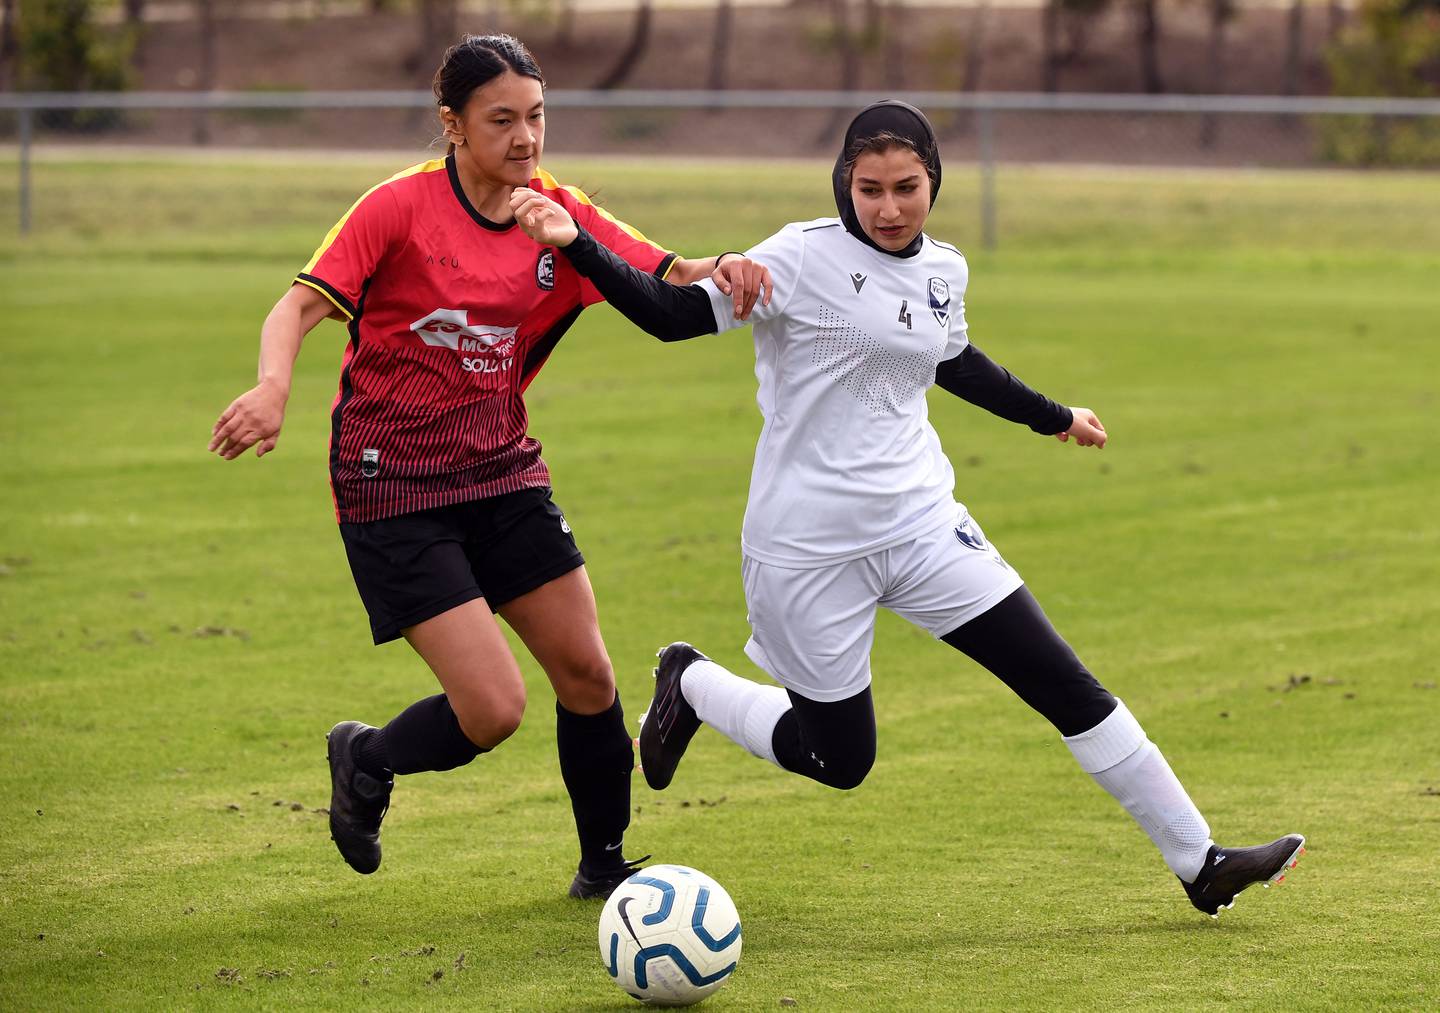 Melbourne Victory Afghan Women's Team player Fatema, right, is tackled during their first match against ETA Buffalo SC in Melbourne. AFP